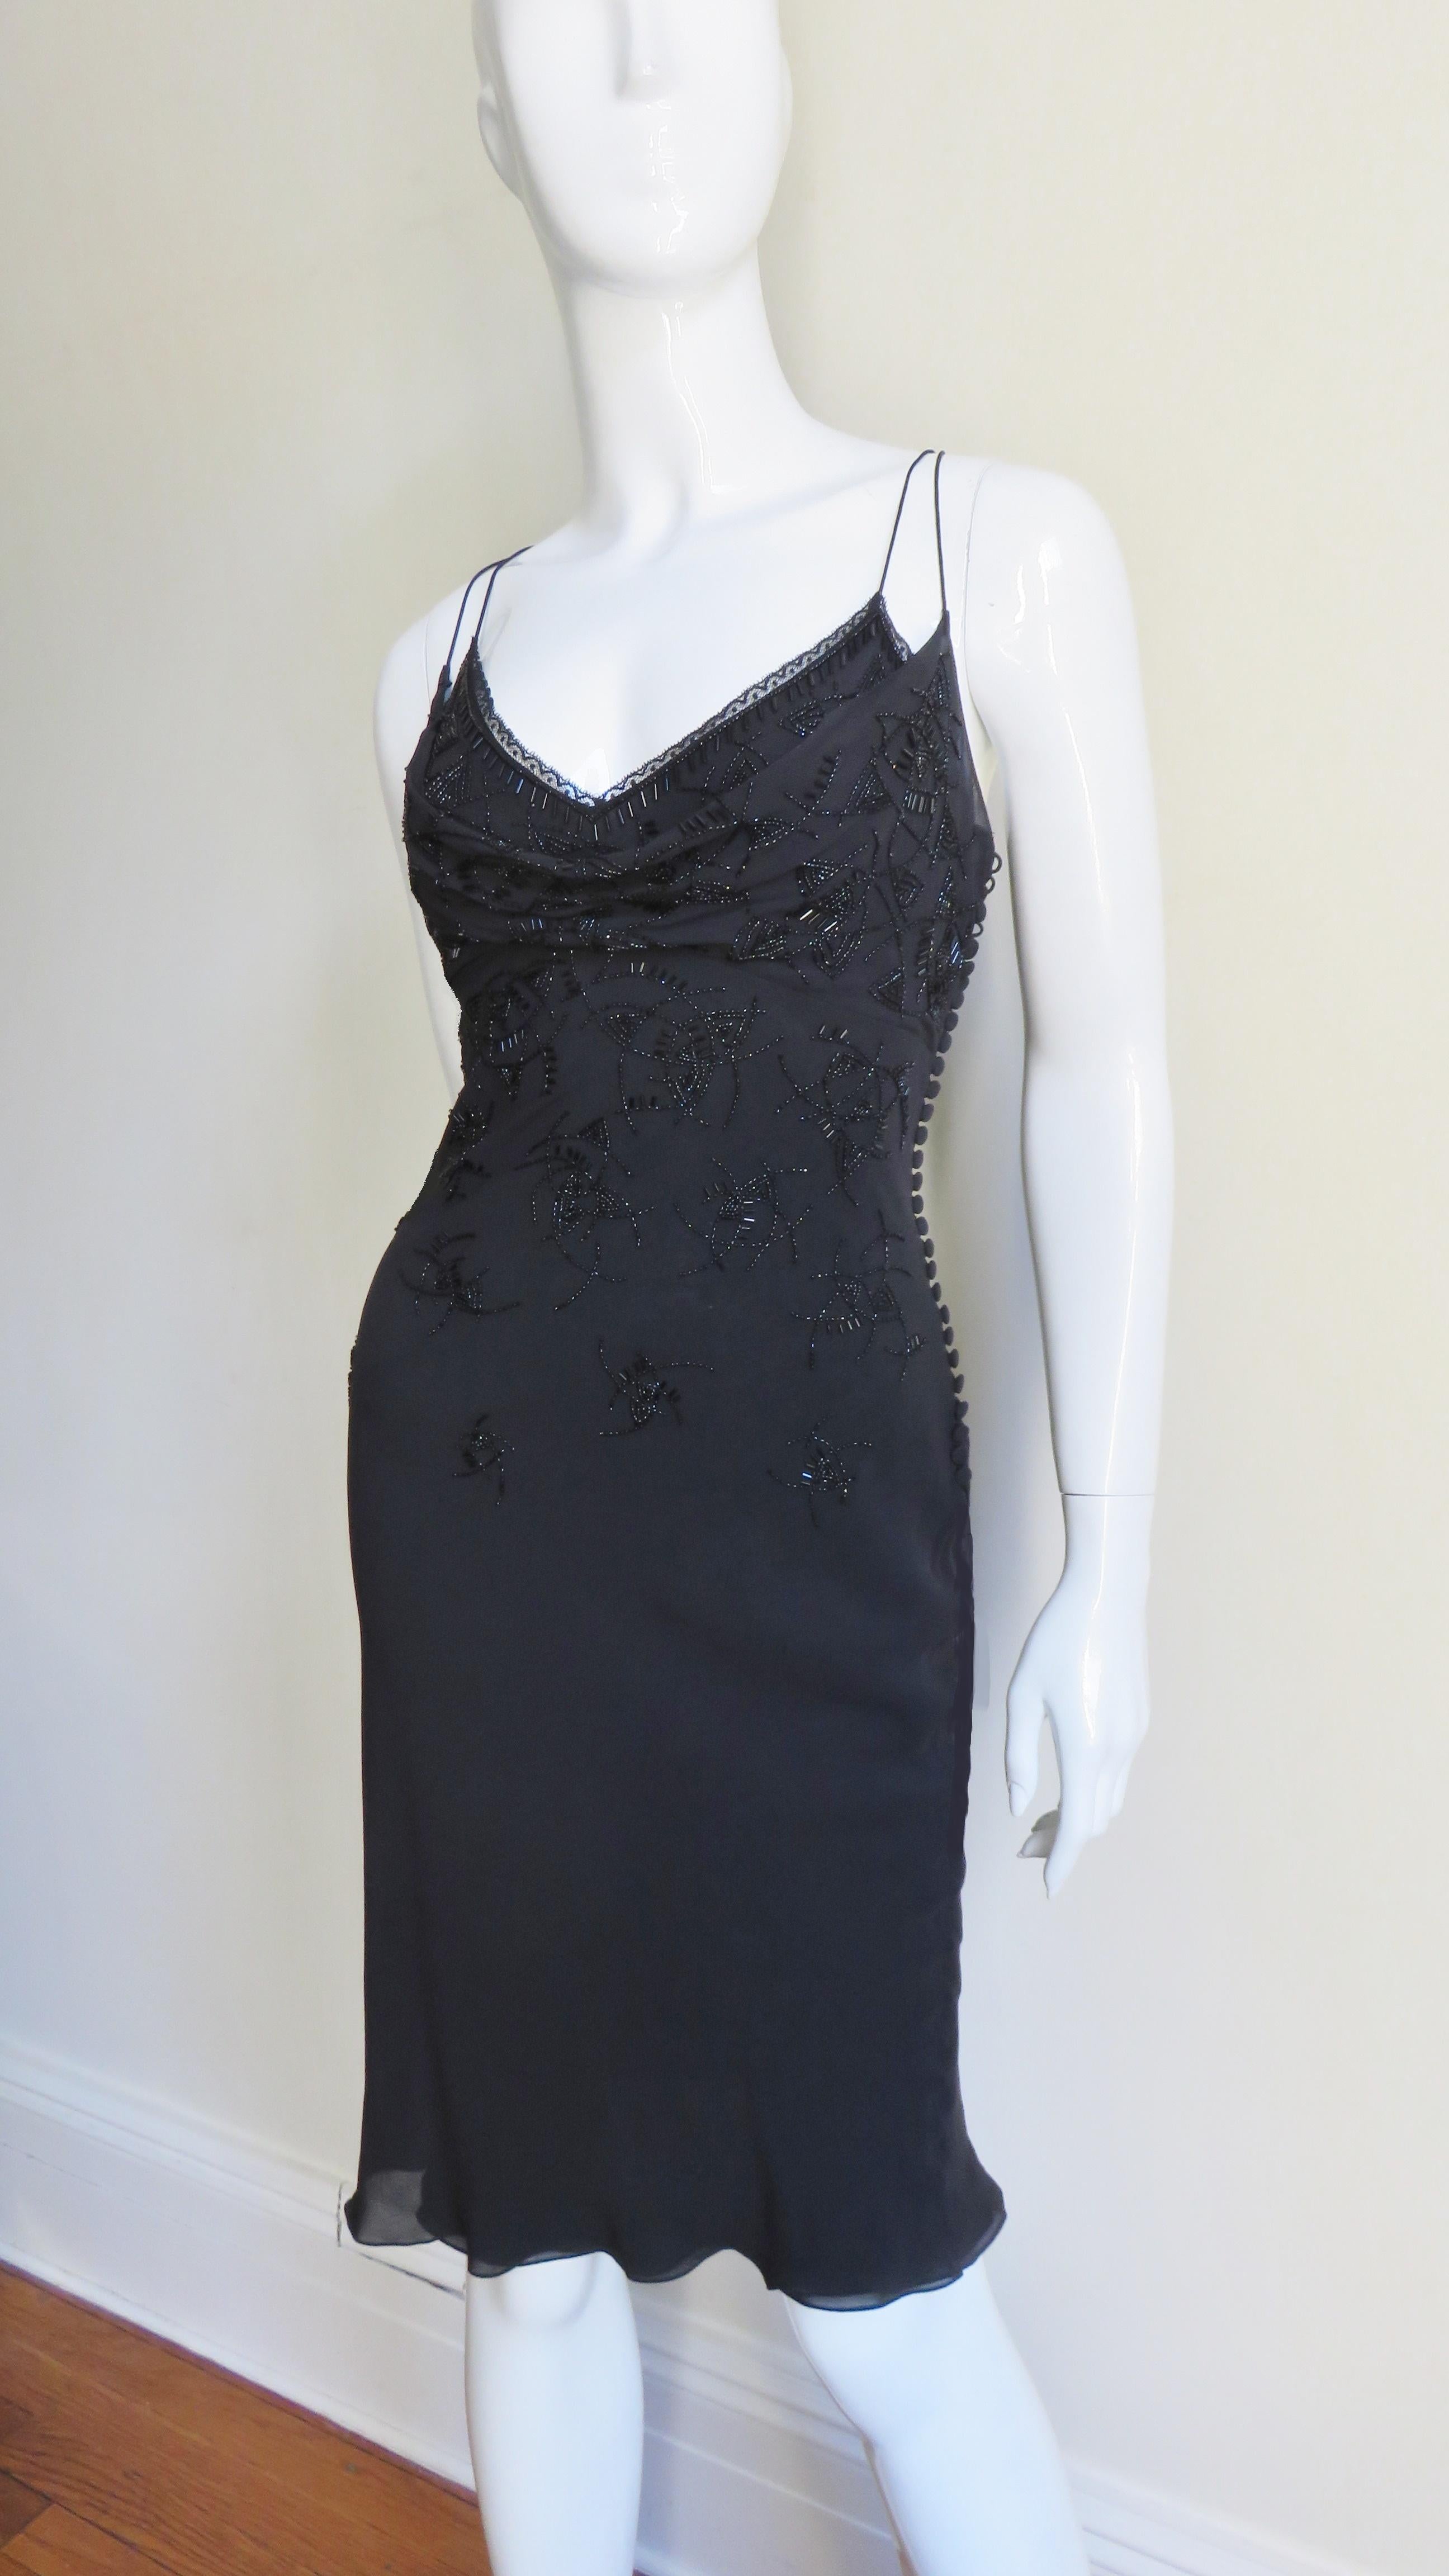 A gorgeous black silk slip dress from Christian Dior. The dress skims the body with a small flare towards the hem and has double spaghetti straps plus a lace trimmed neckline with an abstract pattern of black glass tubular and round seed beads that